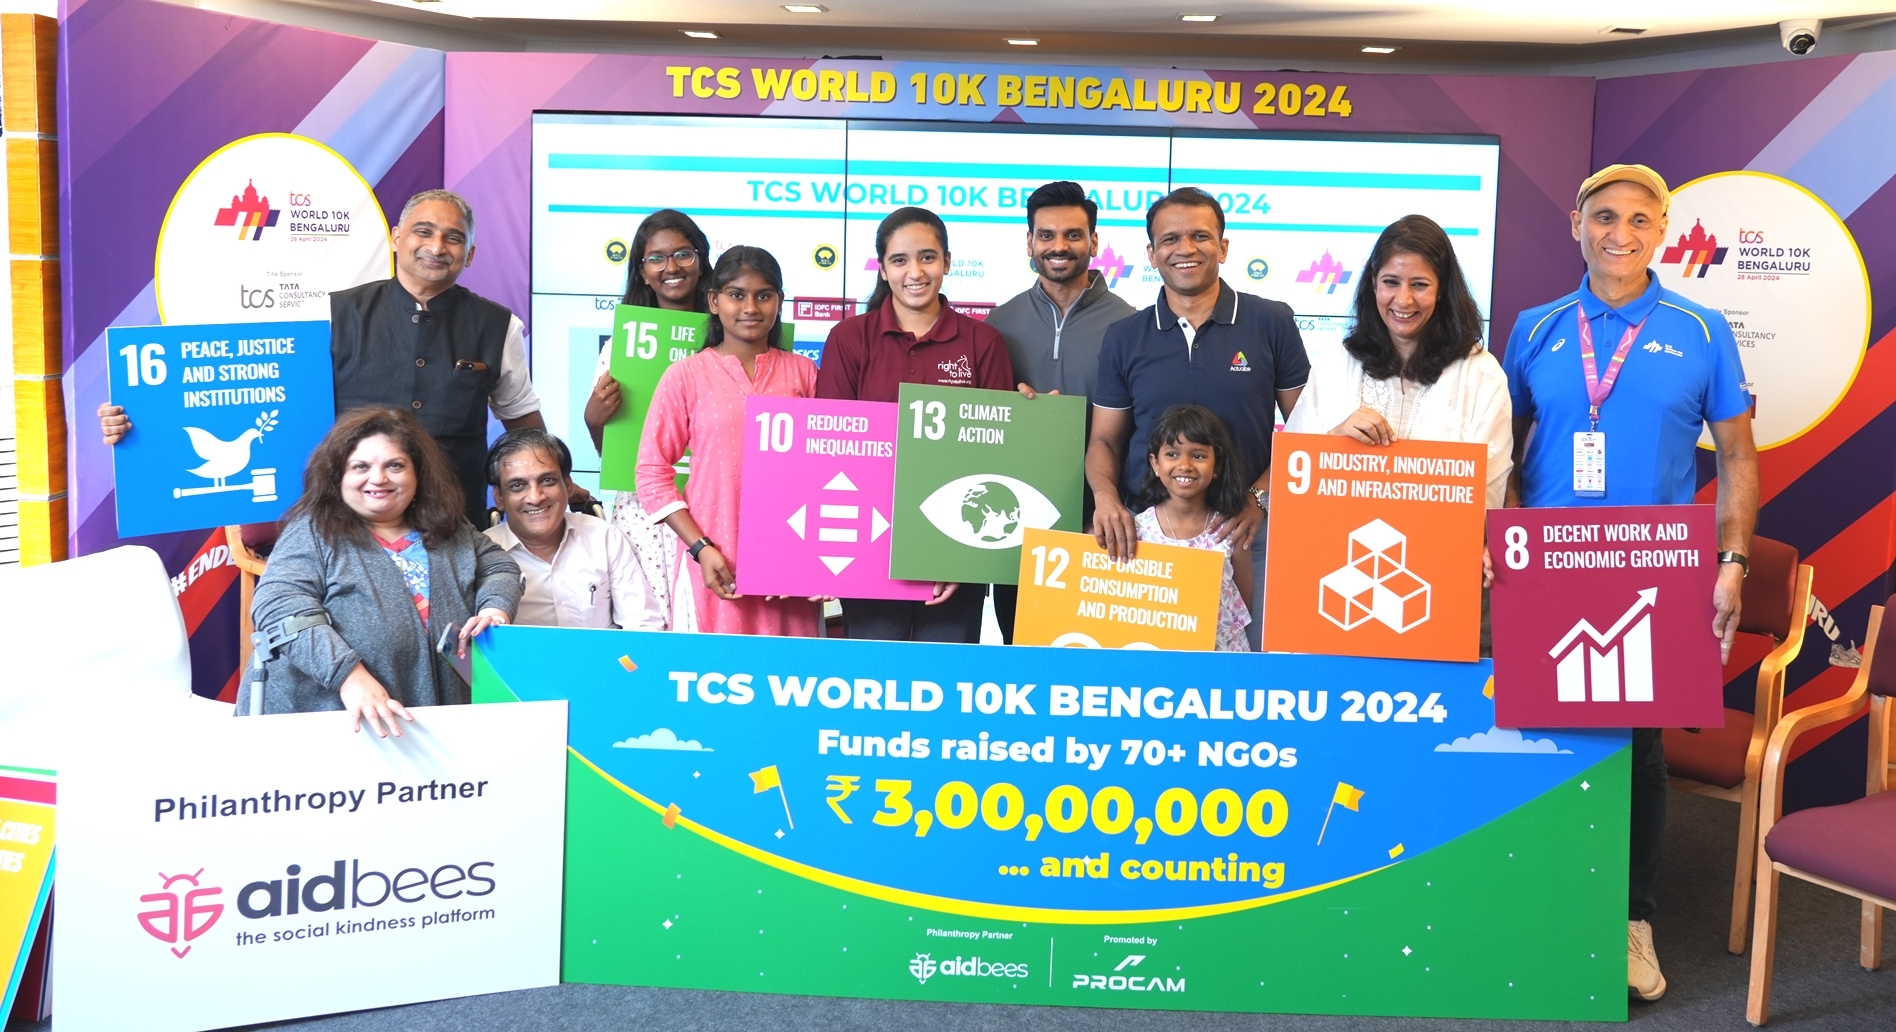 NGOs, Corporates, and citizens join forces to raise over INR 3 Crores for Social Good at the TCS World 10K Bengaluru 2024